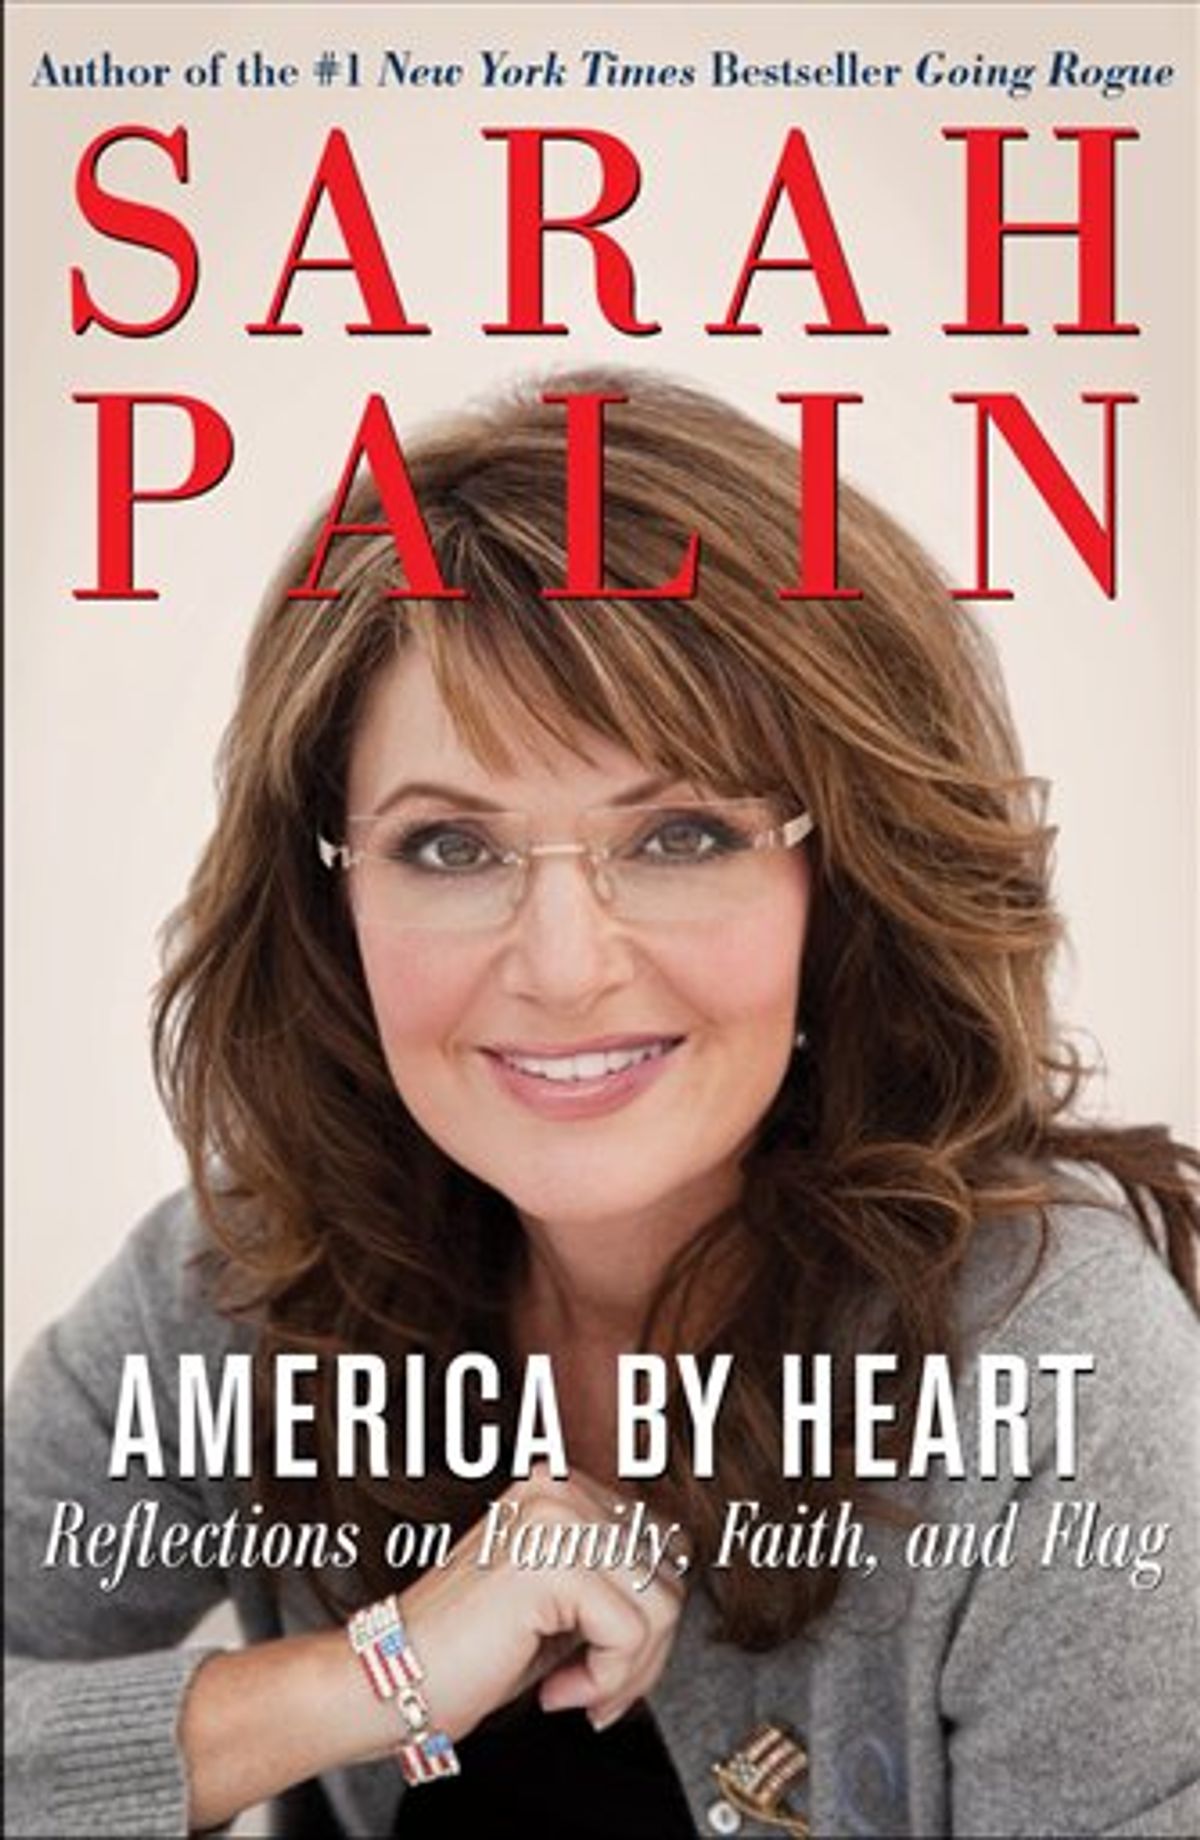 In this book cover image released by HarperCollins, Sarah Palin's "America By Heart: Reflections on Family, Faith, and Flag," is shown. (AP Photo/HarperCollins) (AP)